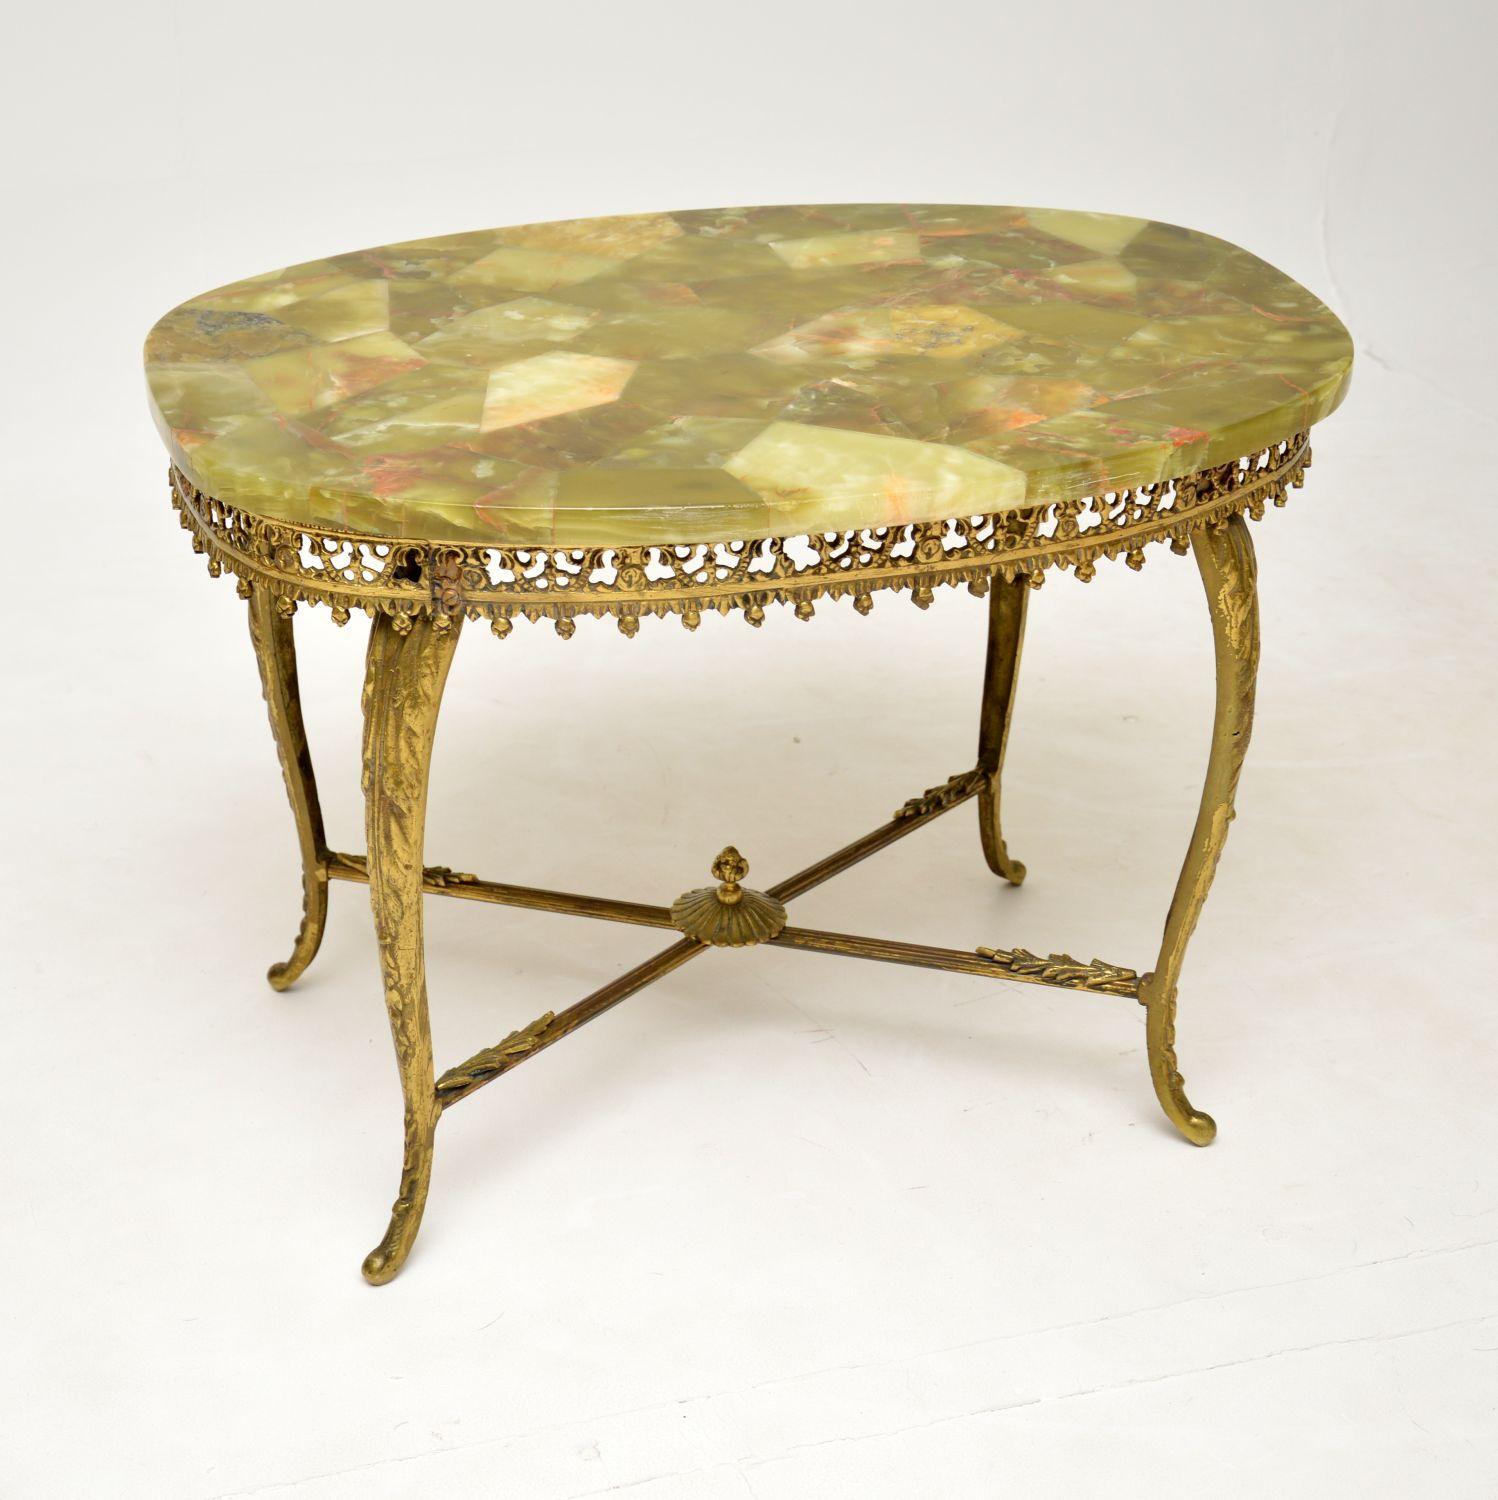 A beautiful & very stylish antique French coffee table in solid brass and onyx. This was made in France, it dates from around the 1930’s.

The quality is fantastic, with a stunning and intricate pierced brass frame. The onyx top is also stunning,